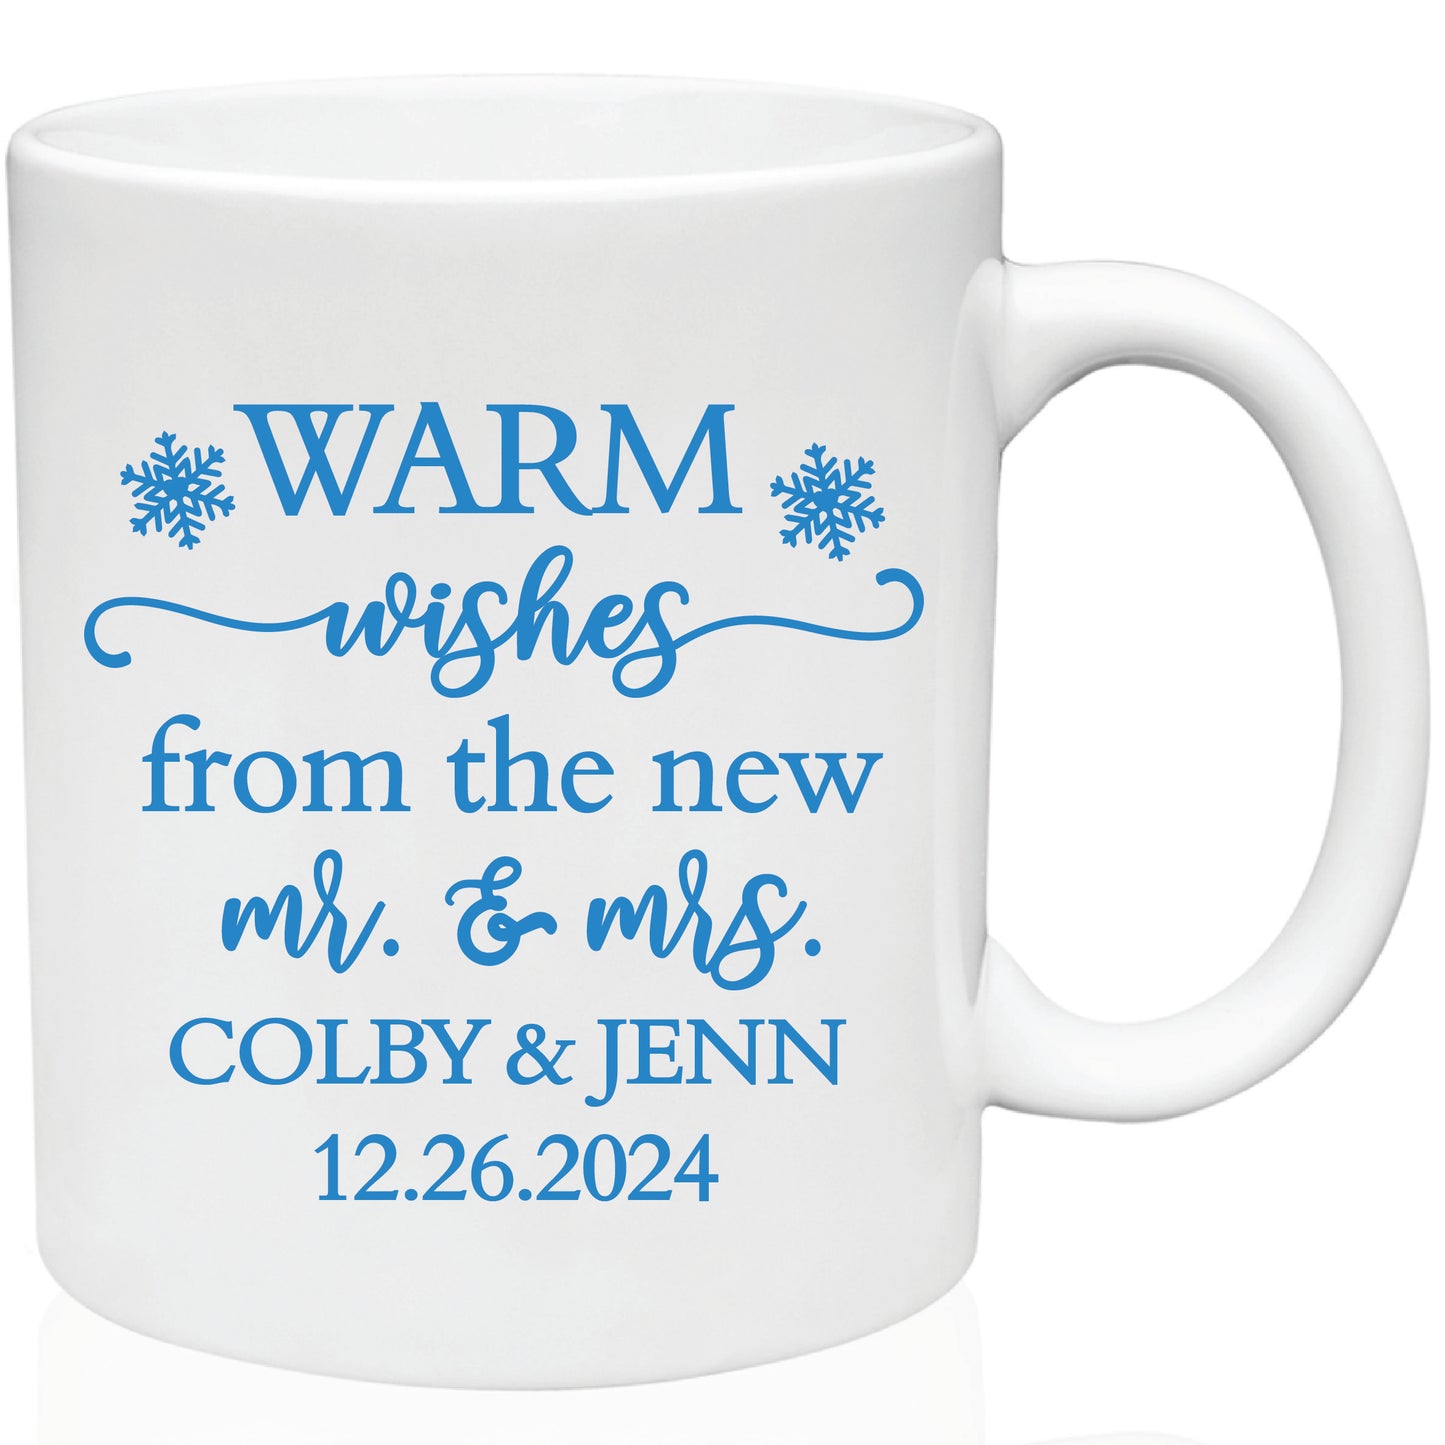 Wedding Mugs- Warm wishes from the new Mr. & Mrs.